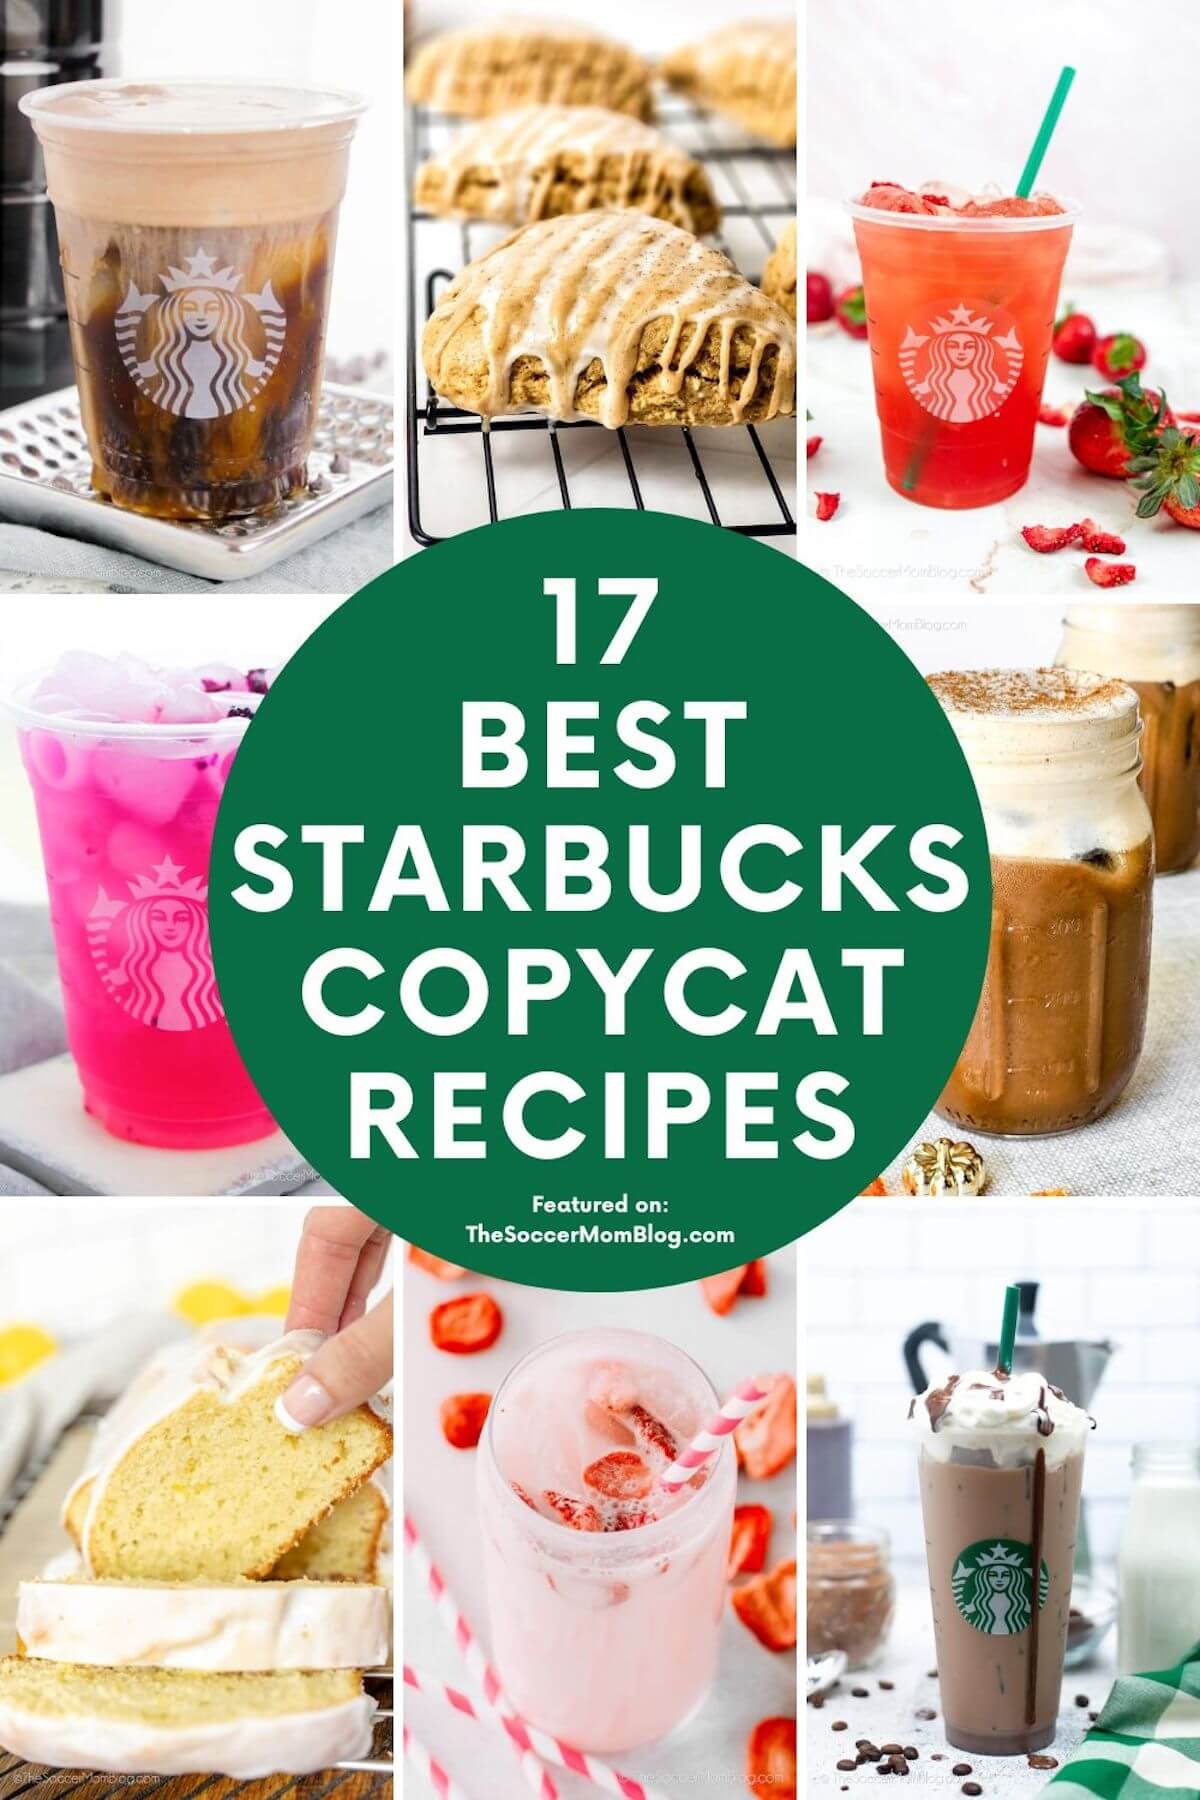 collage image of drinks and baked goods; text overlay "17 Best Starbucks Copycat Recipes"